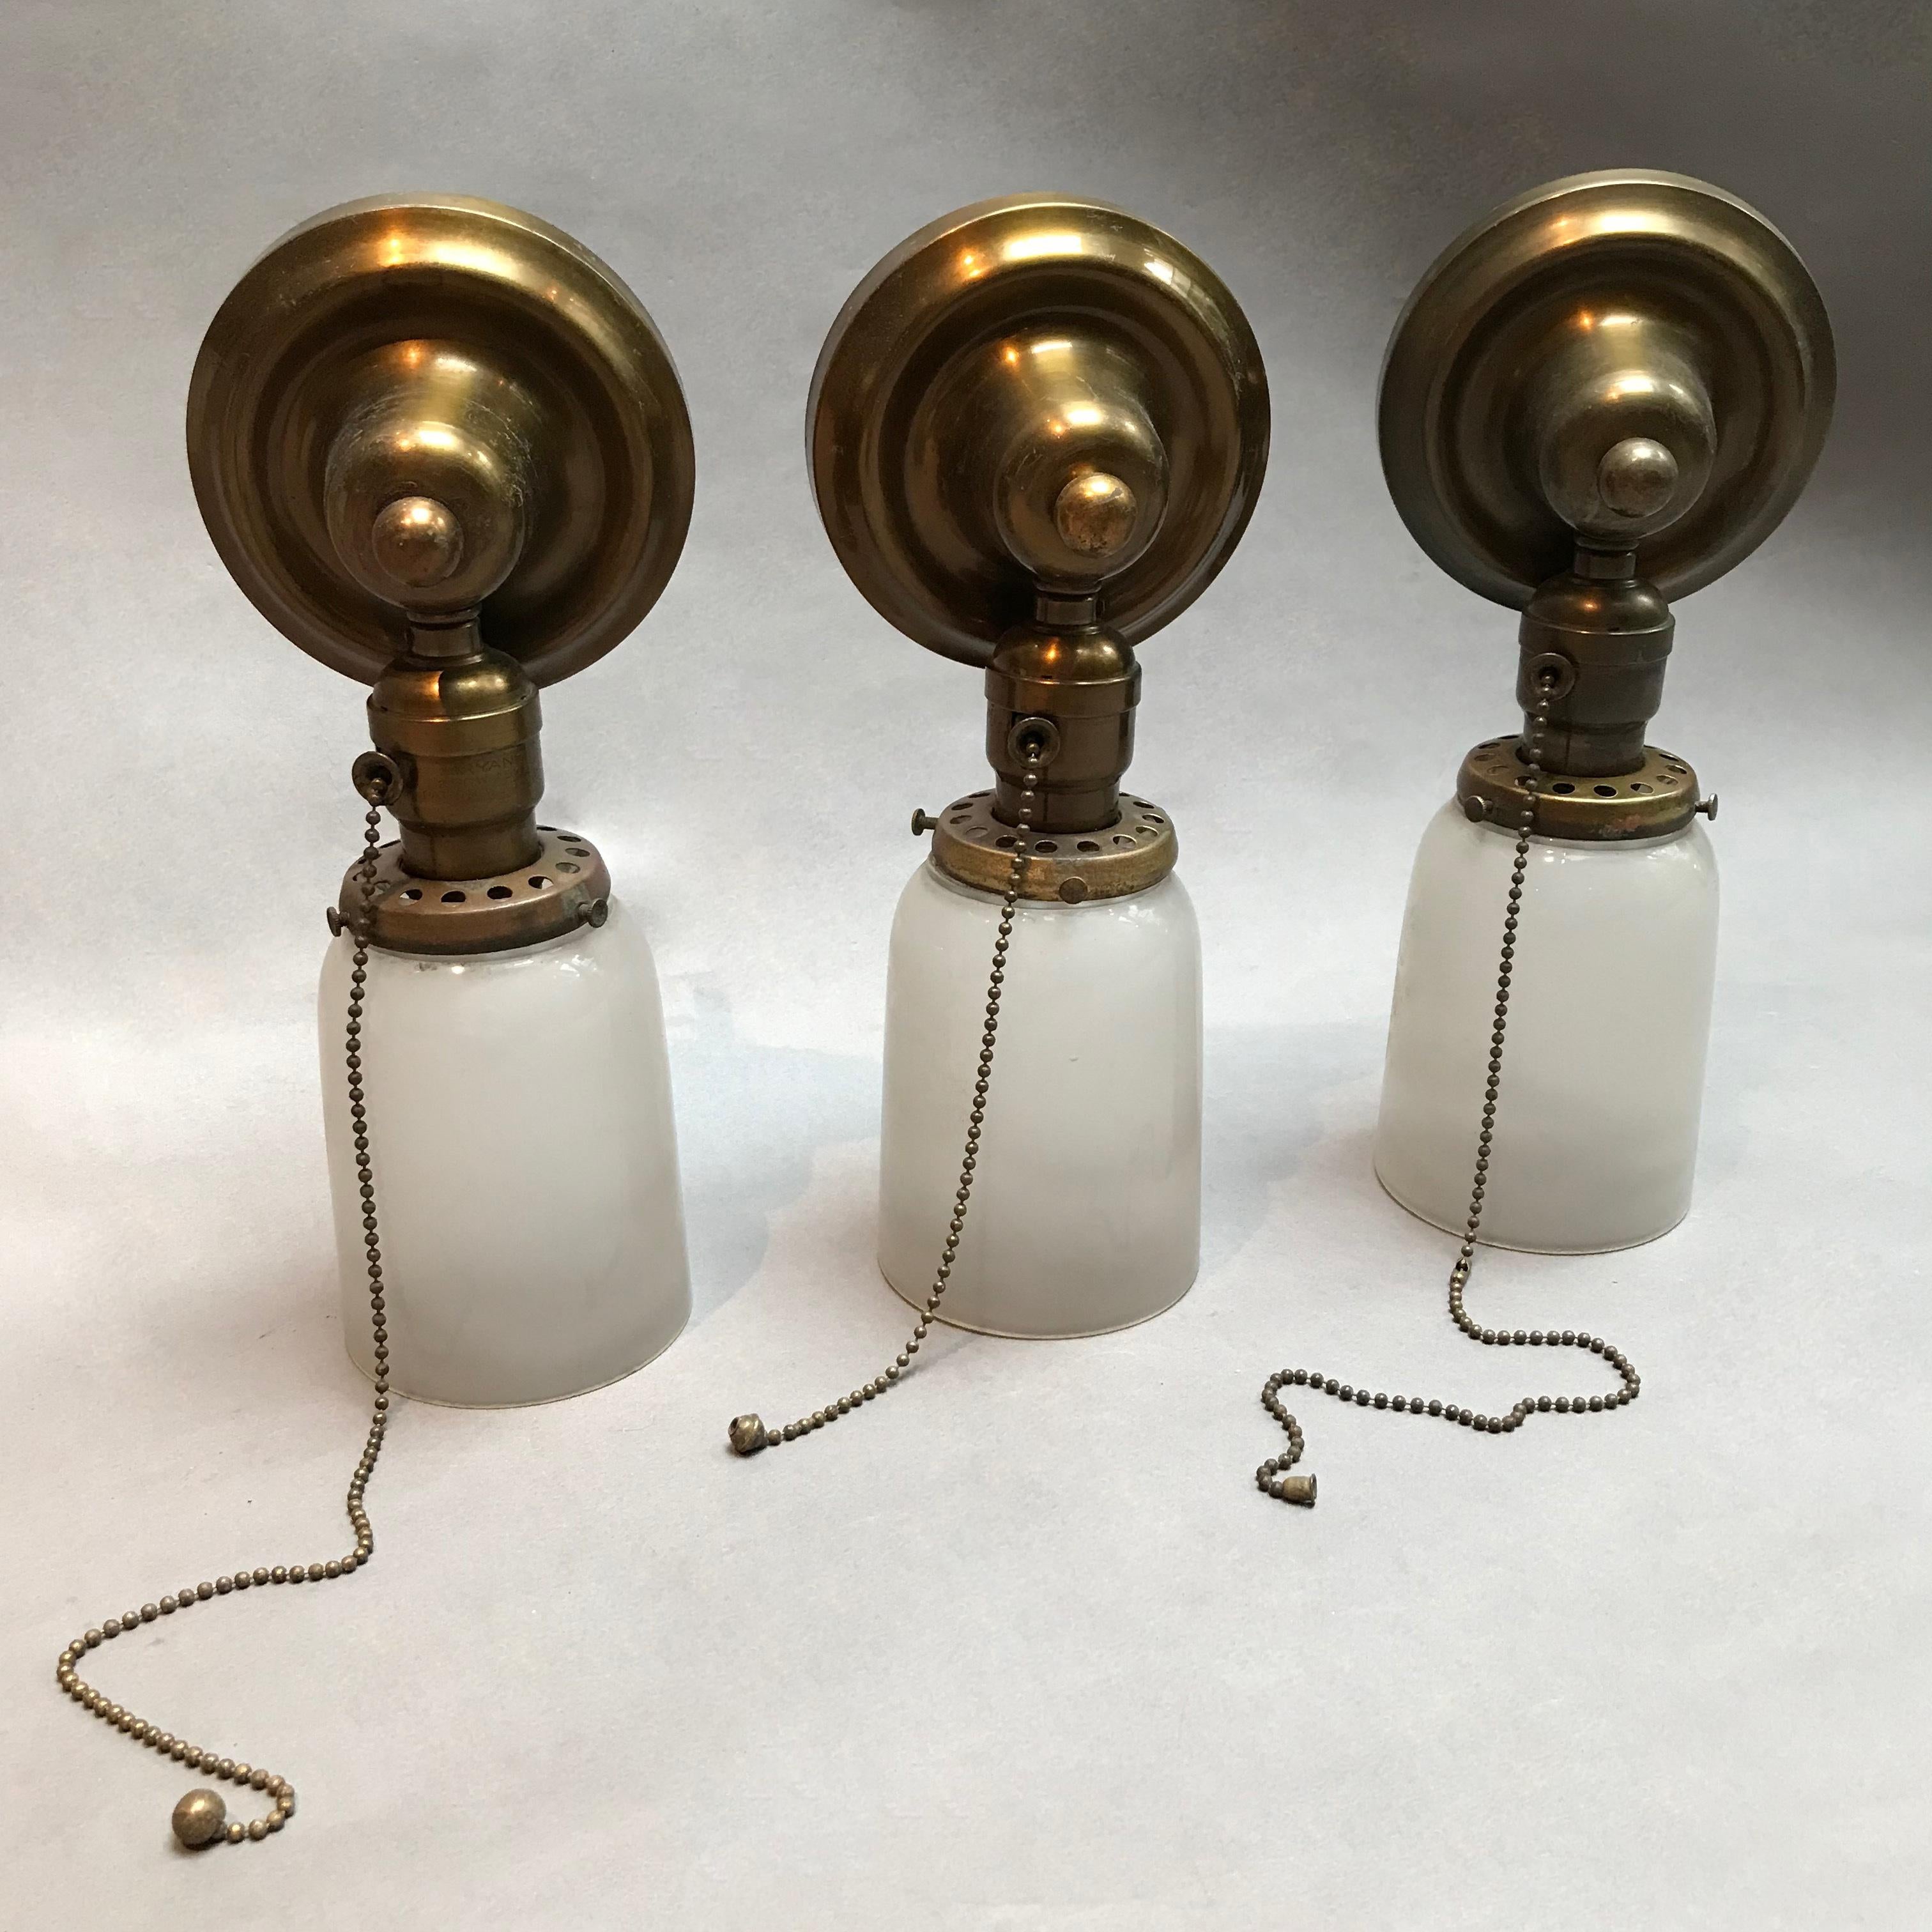 Early 20th century, wall sconce lights feature brass back plates and pull chain fitters with frosted glass bell shades are newly wired to accept up to 100 watt bulbs each. The back plate measures 4.5 inches diameter, the shade itself is 4.5 inches